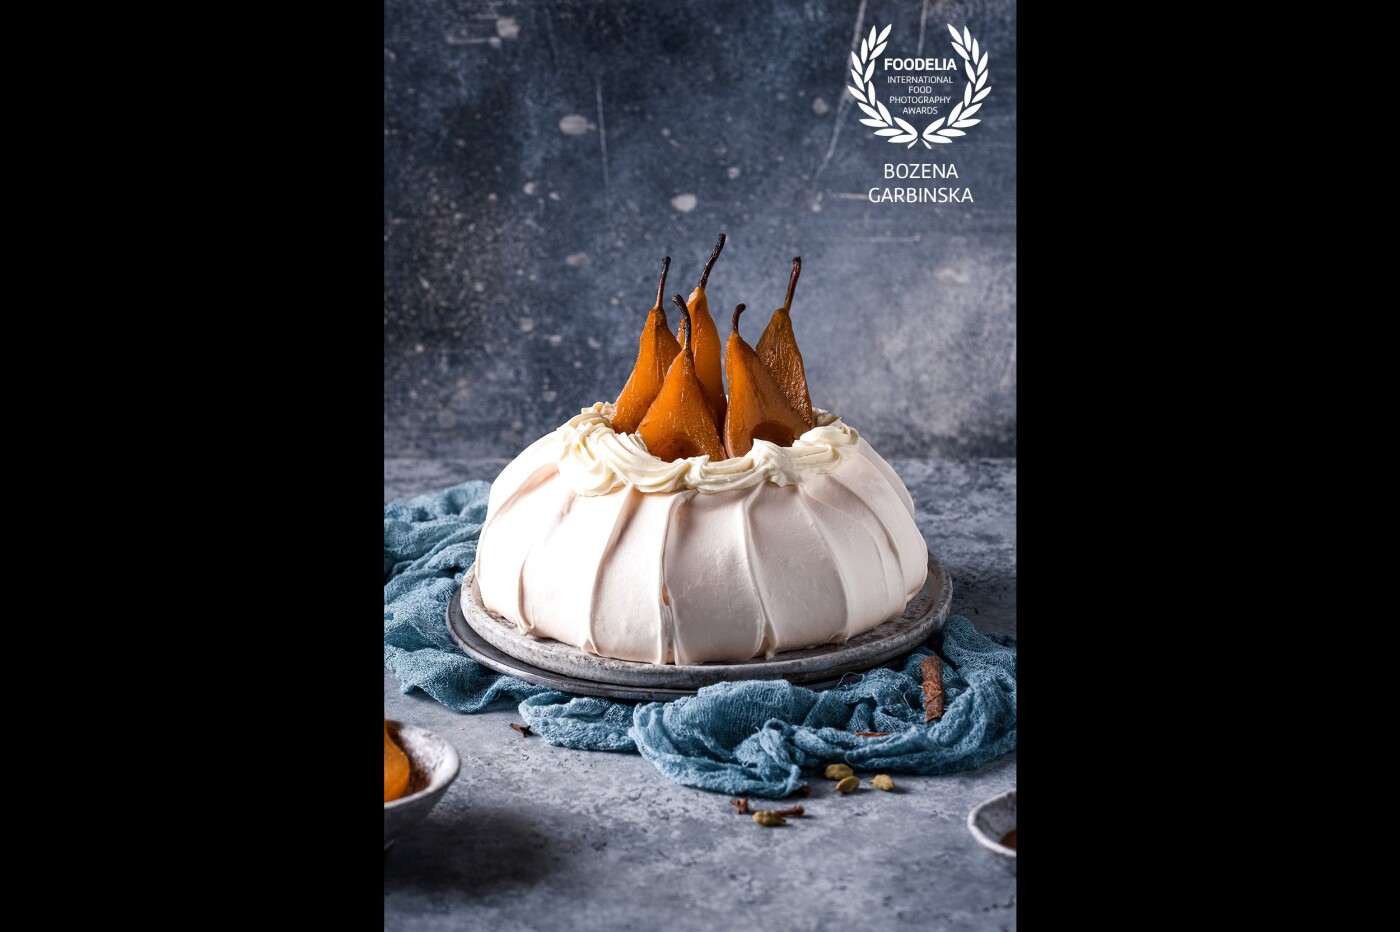 Pavlova with pears in coffee and rum syrup<br />
Camera: Fuji X-T3<br />
Lens: Fujinon 80 mm macro<br />
Settings: ISO 160, 80 mm, 1/8 s, f/5.6<br />
Shot using artificial light